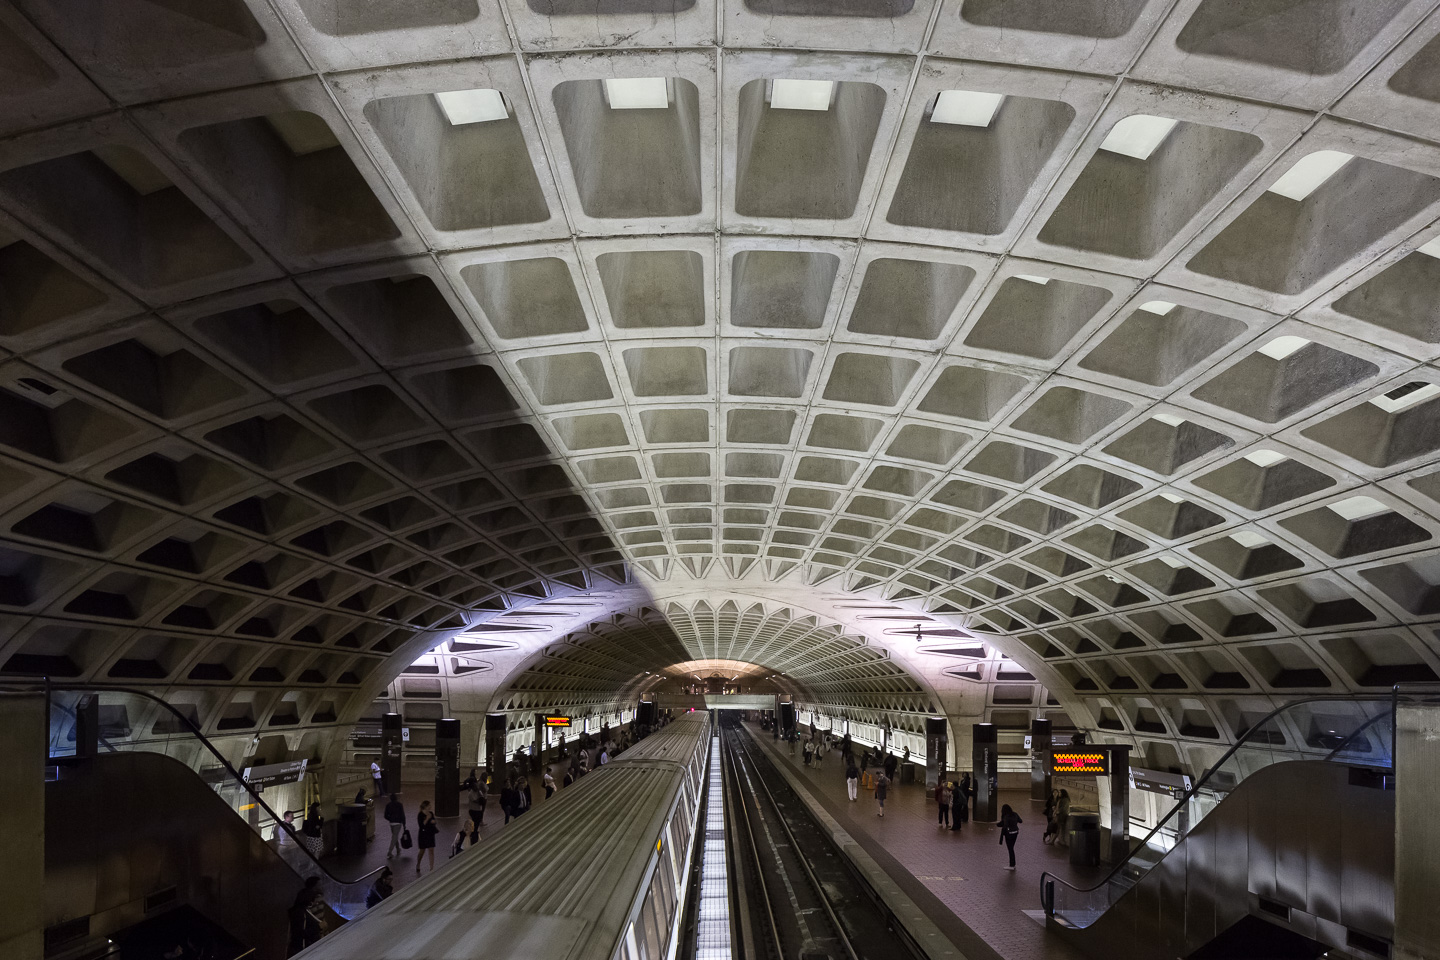 L'Enfant Plaza Metrorail station in Washington DC by architect Harry Weese. Photograph by Jason R. Woods.